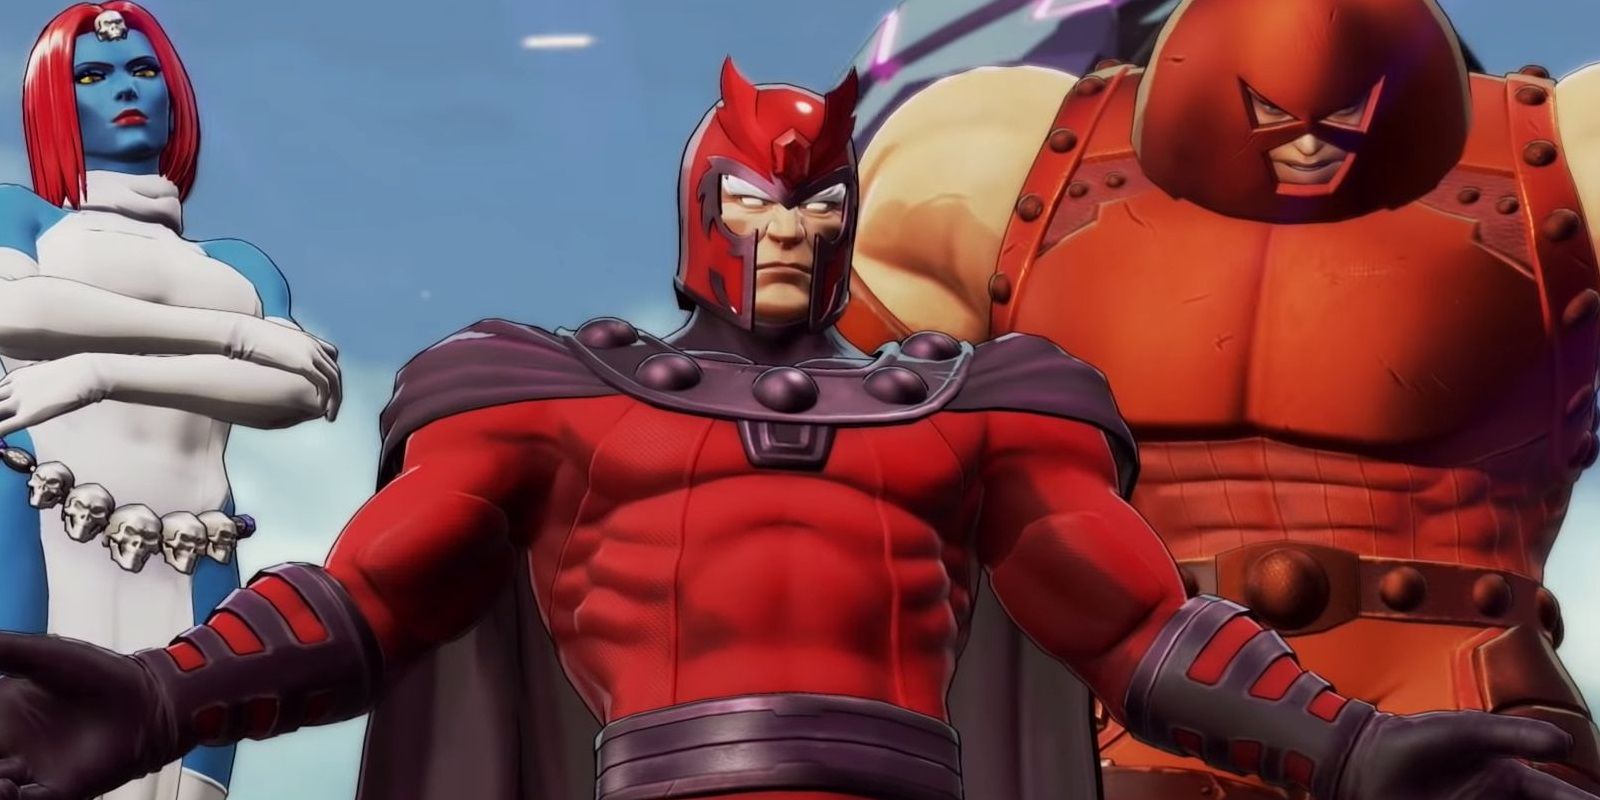 Magneto with Mystique and Juggernaut behind him in Marvel Ultimate Alliance